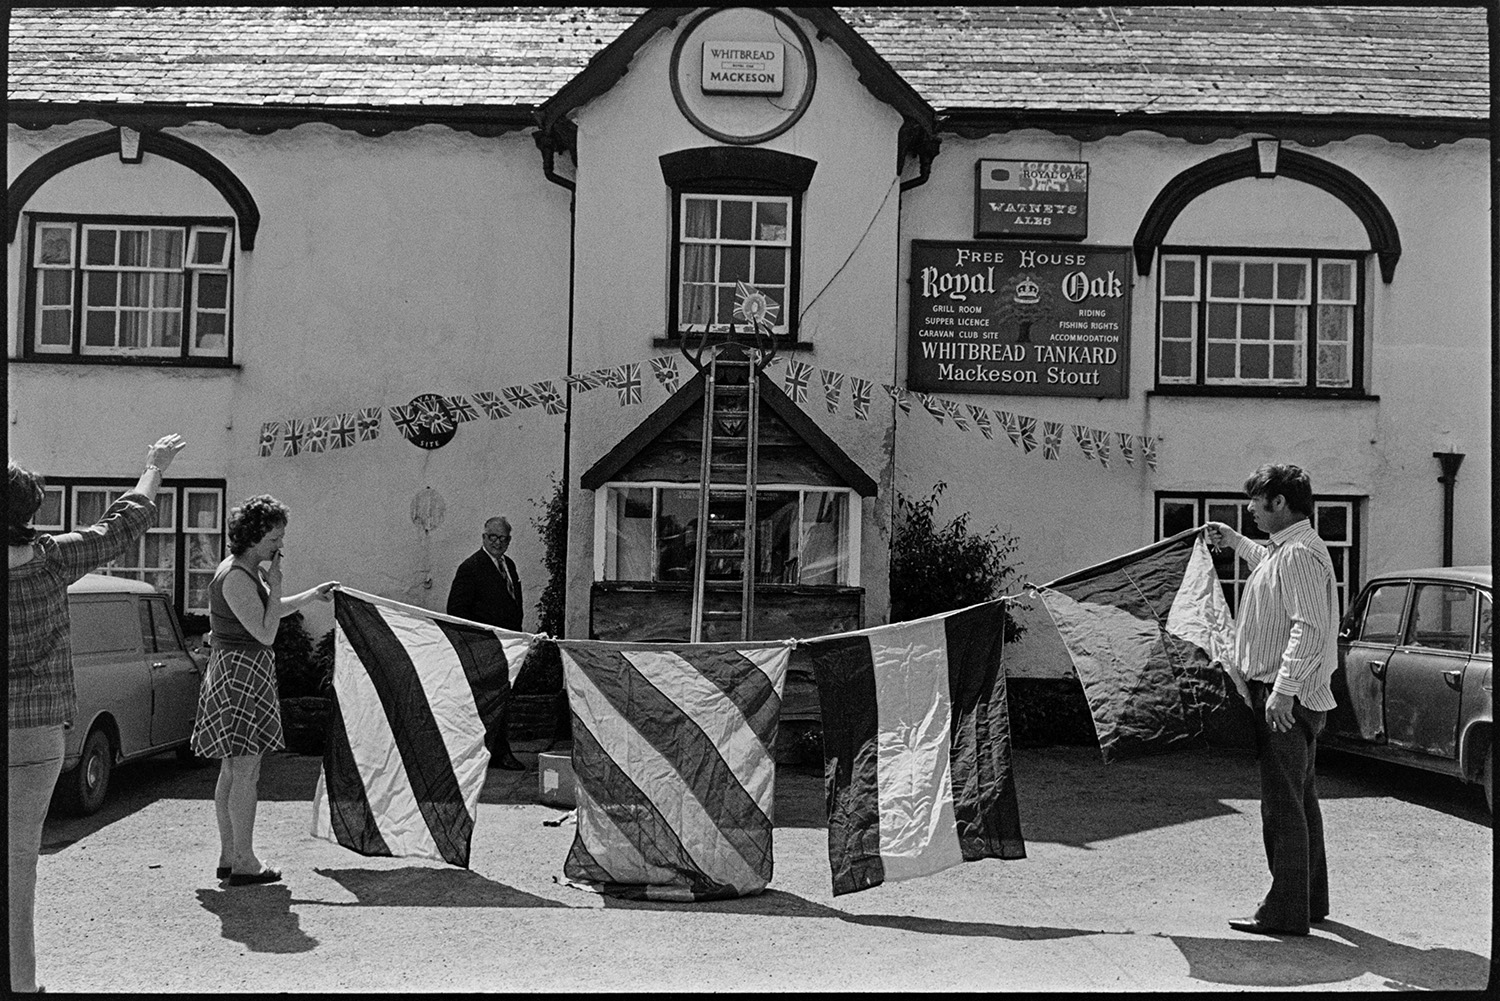 Putting up flags for jubilee on village pub. 
[Men and women decorating the Royal Oak pub in Dolton with flags, including Union Jack flags for Queen Elizabeth II Silver Jubilee. A ladder is leaning against the pub in the background.]